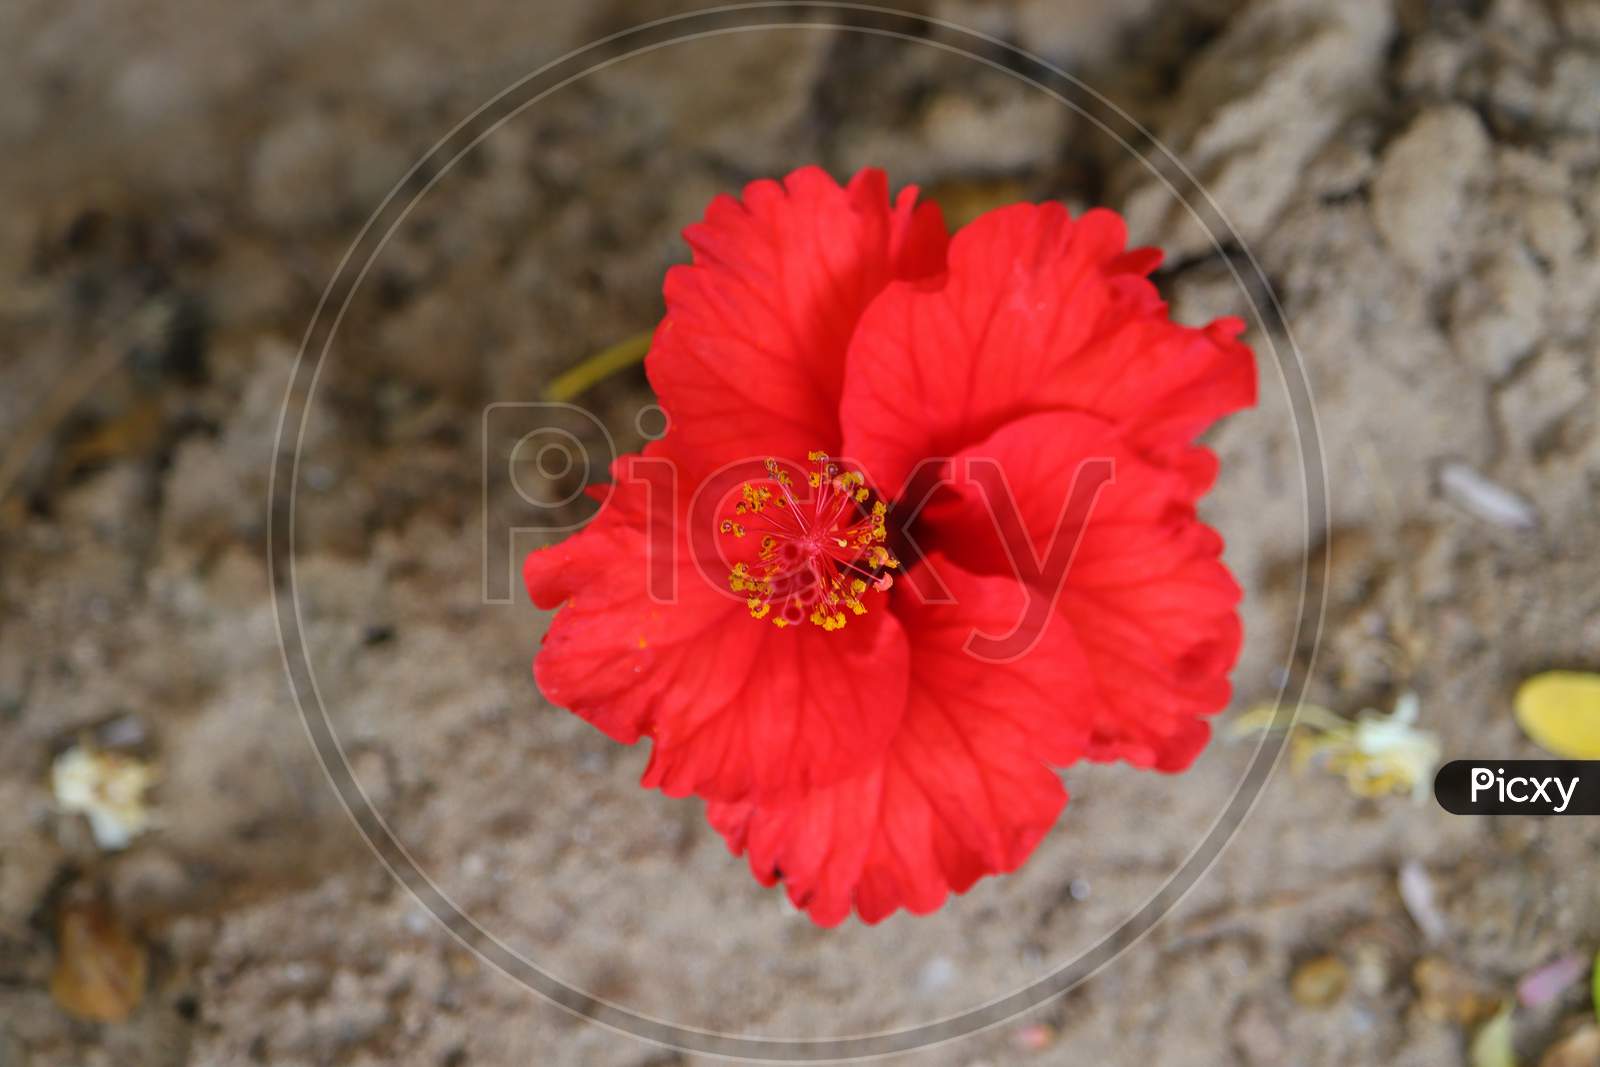 Red Hibiscus Flower Laying On Ground, Hd Image